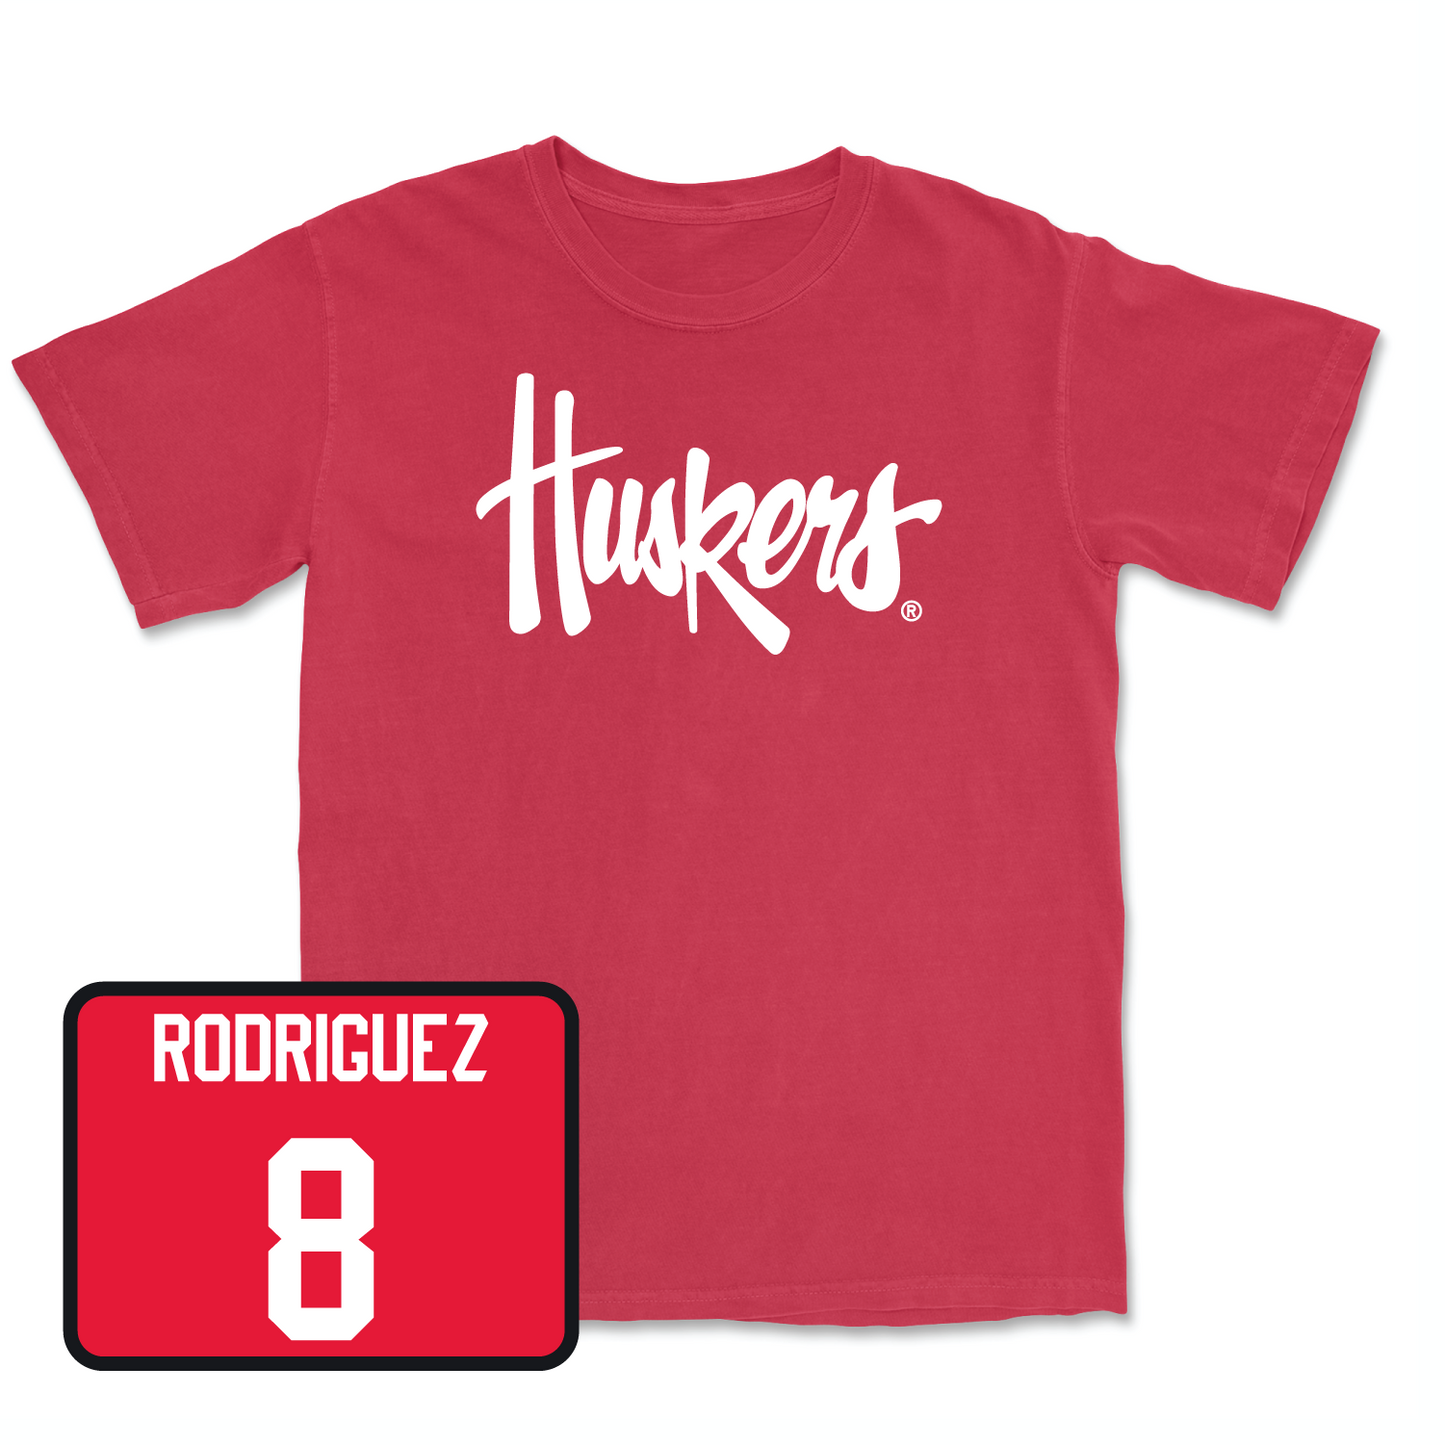 Red Women's Volleyball Huskers Tee Youth Medium / Lexi Rodriguez | #8